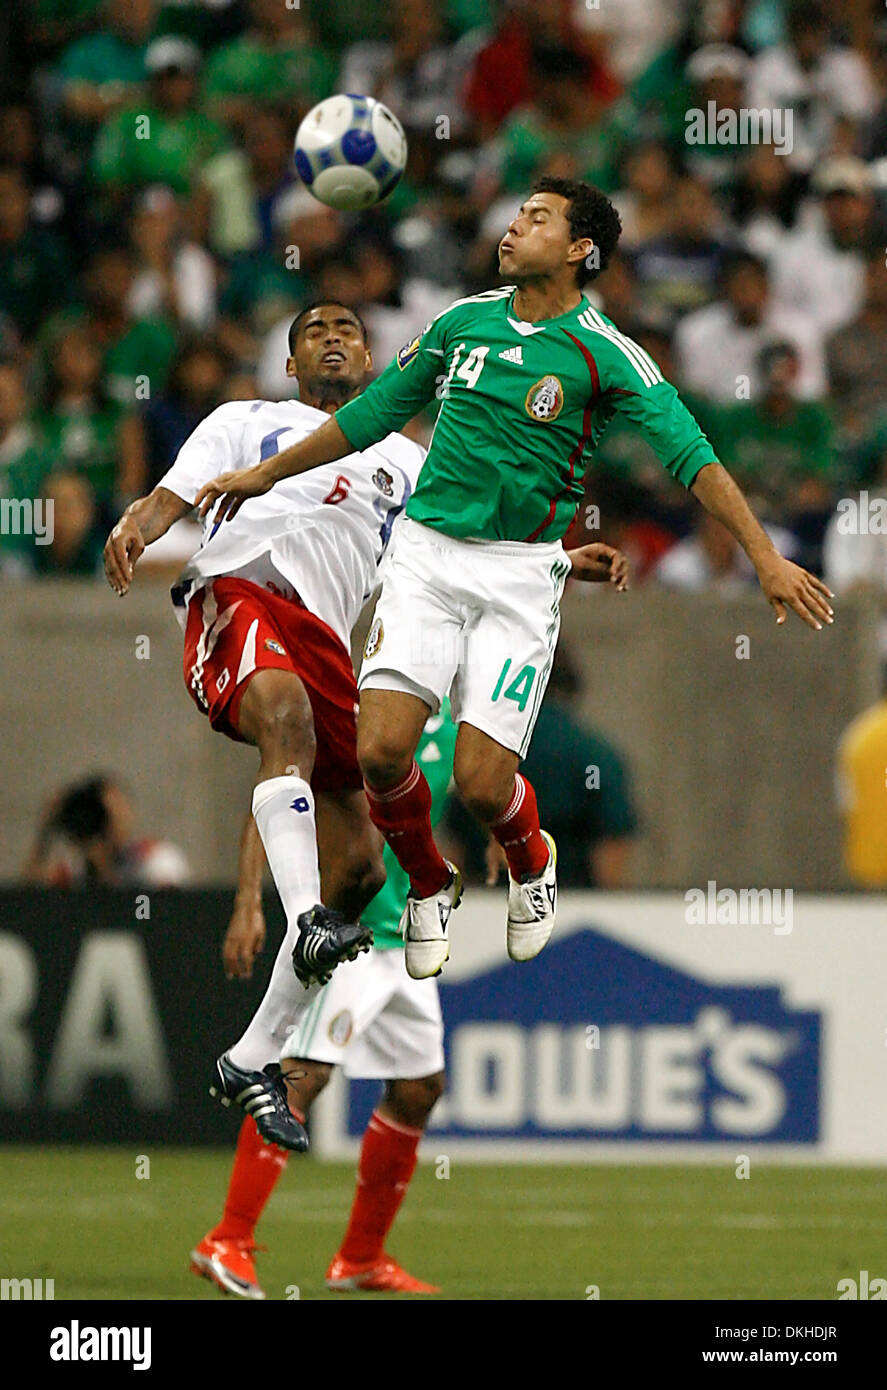 Mexico's Miguel Sabah battles in mid air with Panama's  Gabriel Gomez during the second period of play of the CONCACAF Gold Cup held at Reliant Stadium in Houston, Texas. The game ended in a 1-1 draw. (Credit Image: © Anthony Vasser/Southcreek Global/ZUMApress.com) Stock Photo